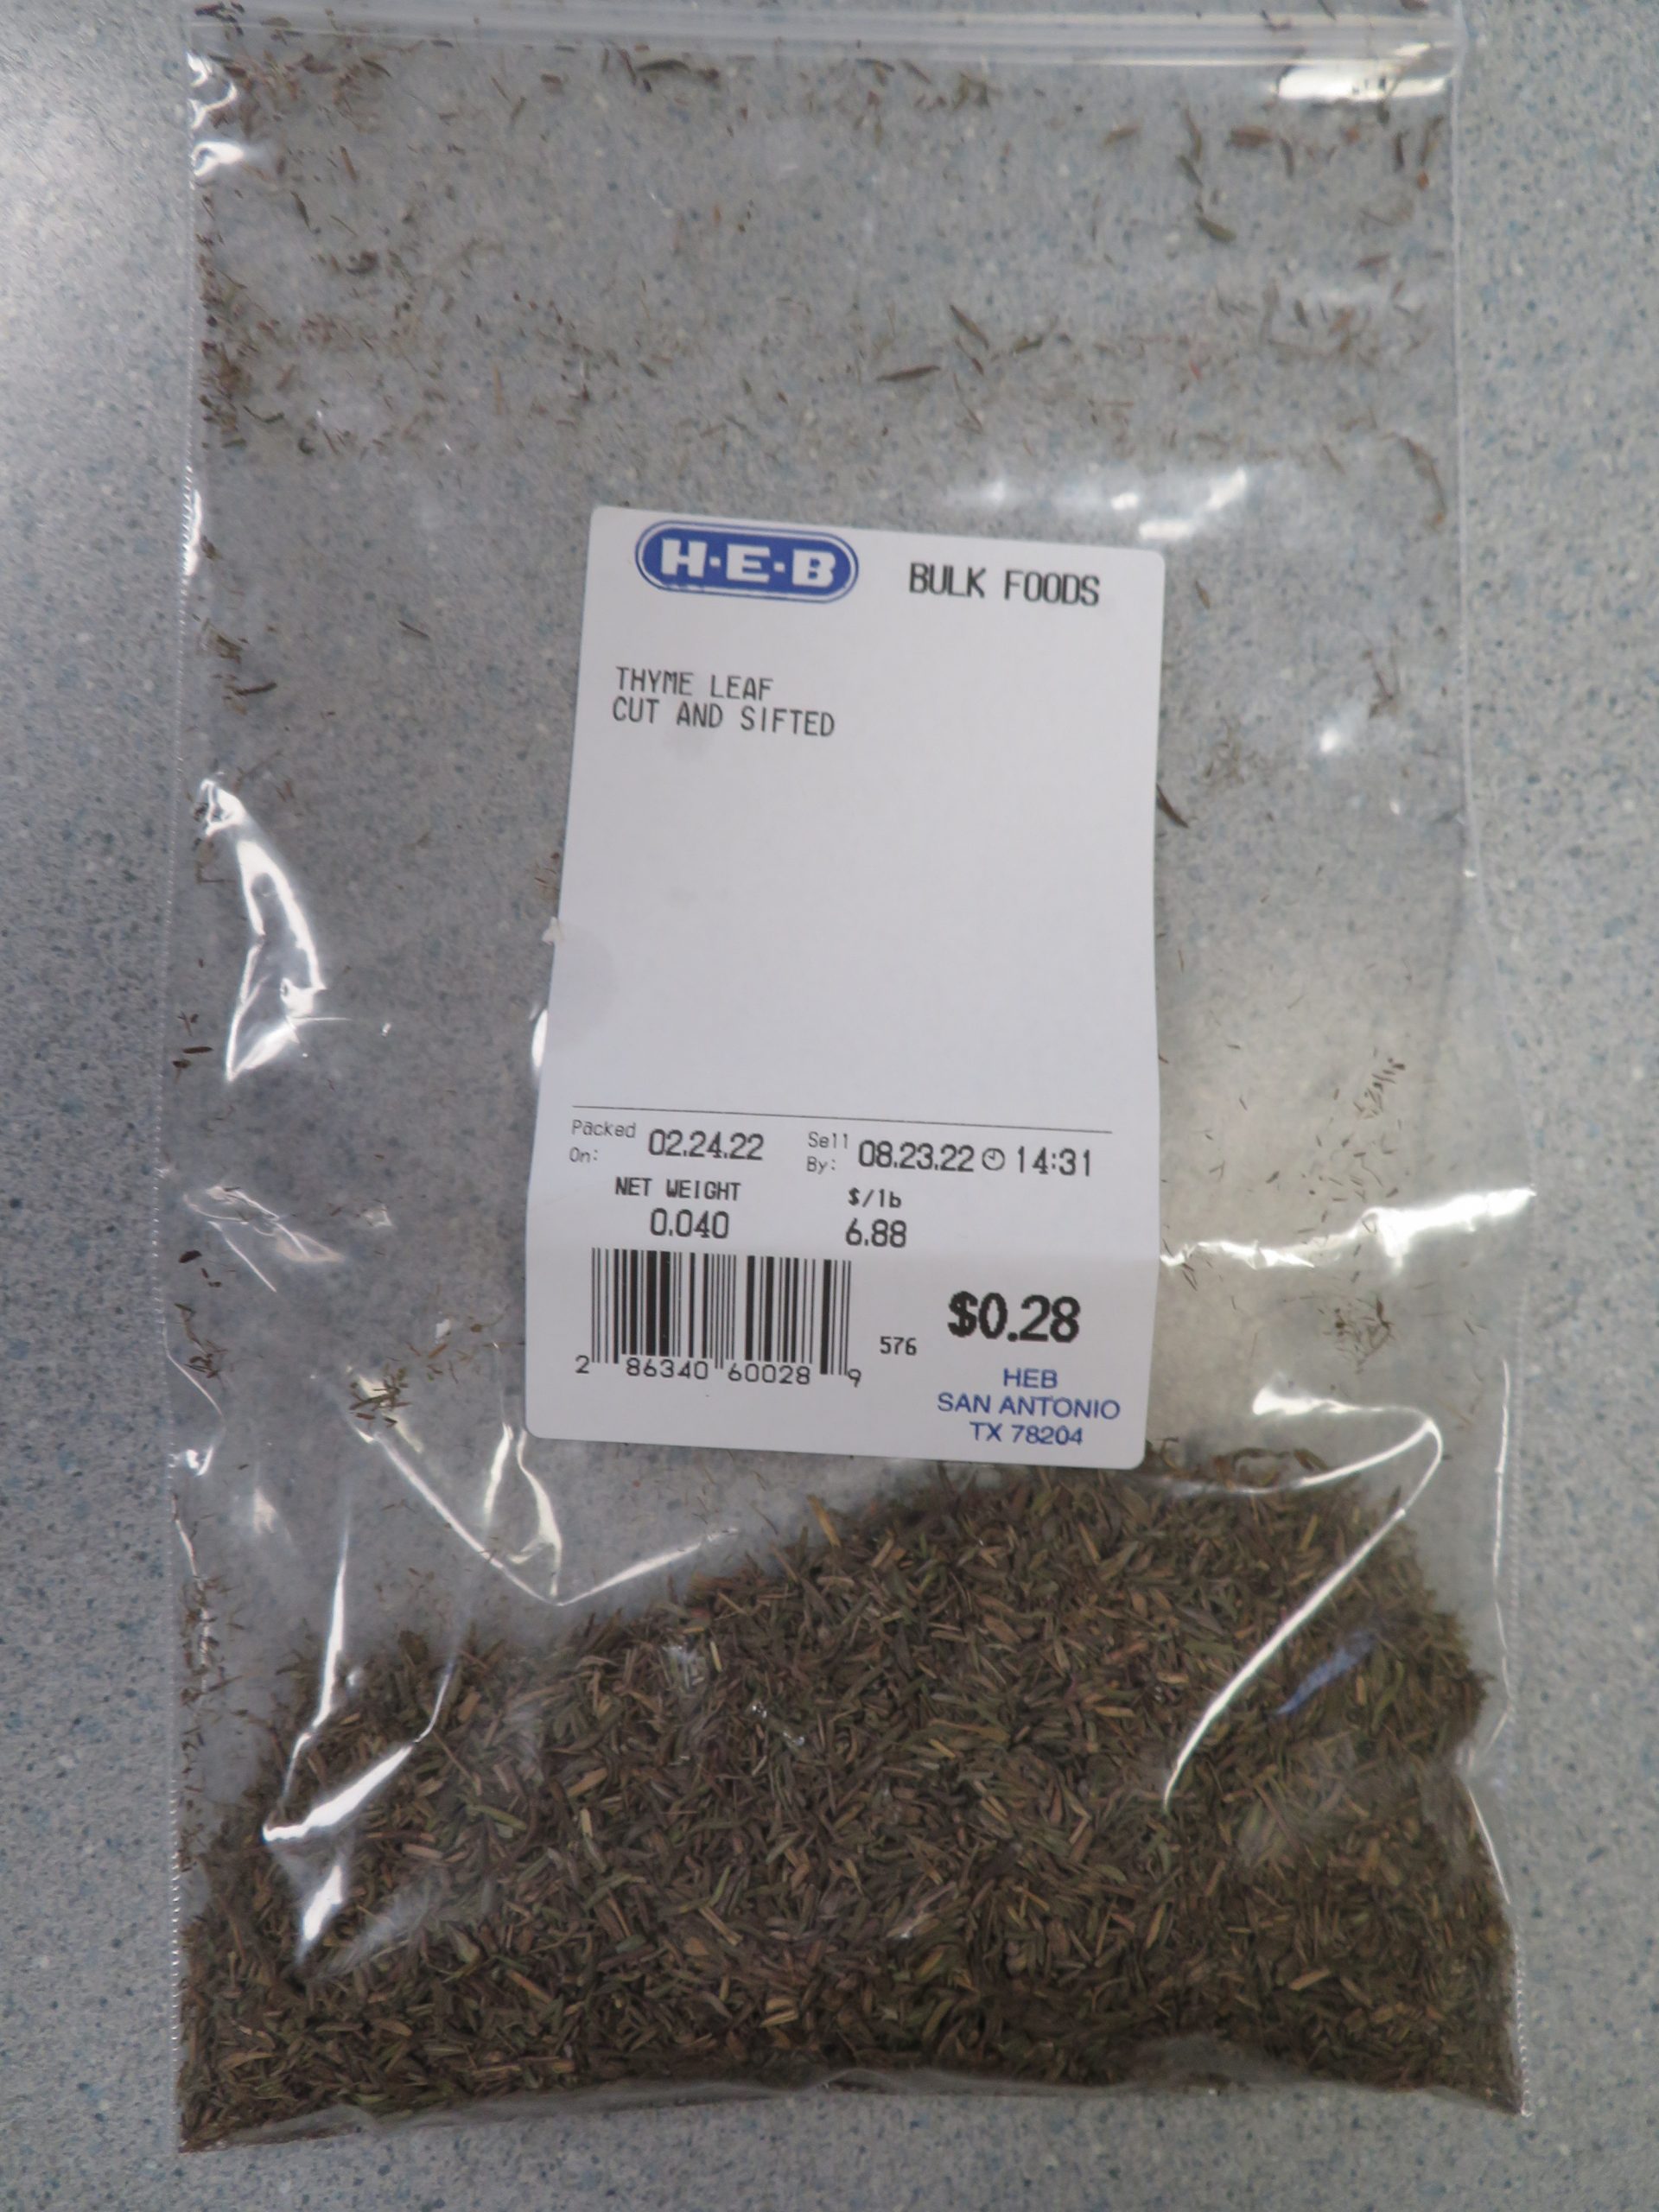 Small bag of dried leaf thyme showing price per pound and cost of the amount purchased